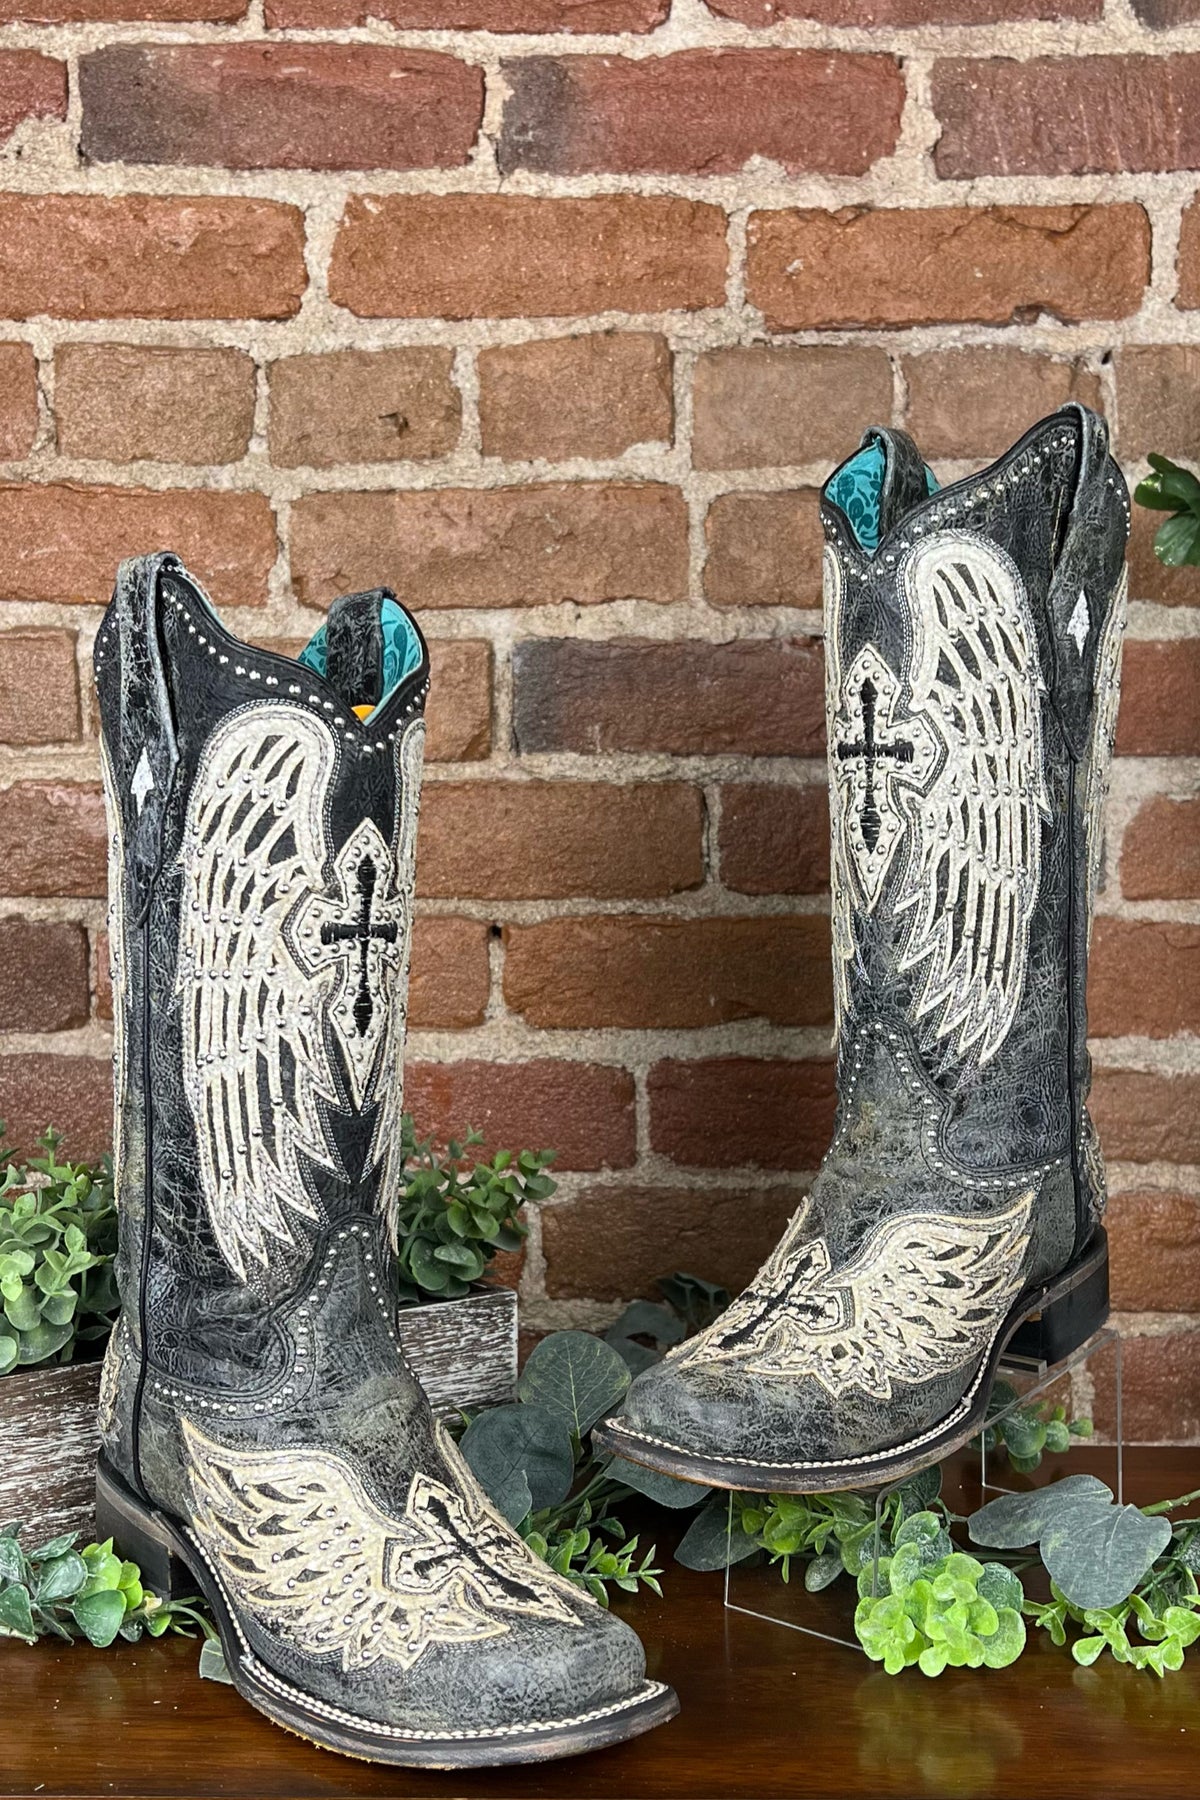 Corral Women's Black Cross & Wings Stud Boots-Boot-Corral West/Circle G by Corral West-Gallop 'n Glitz- Women's Western Wear Boutique, Located in Grants Pass, Oregon